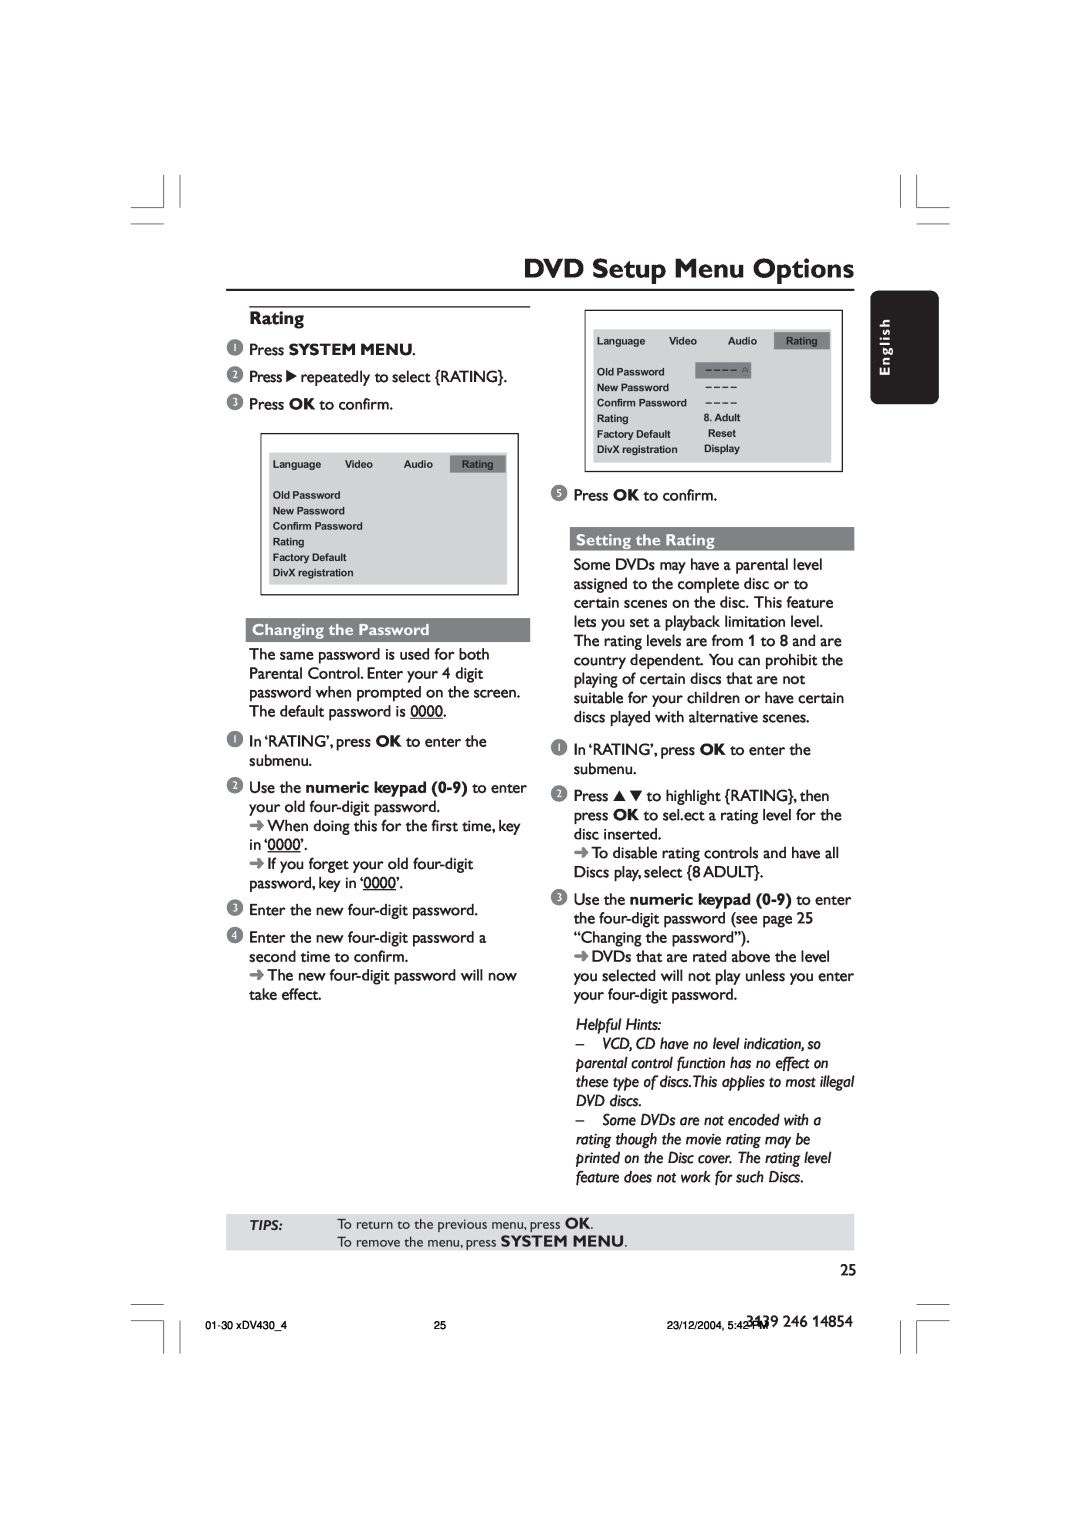 Philips MMS430 user manual DVD Setup Menu Options, Changing the Password, Setting the Rating, Helpful Hints 